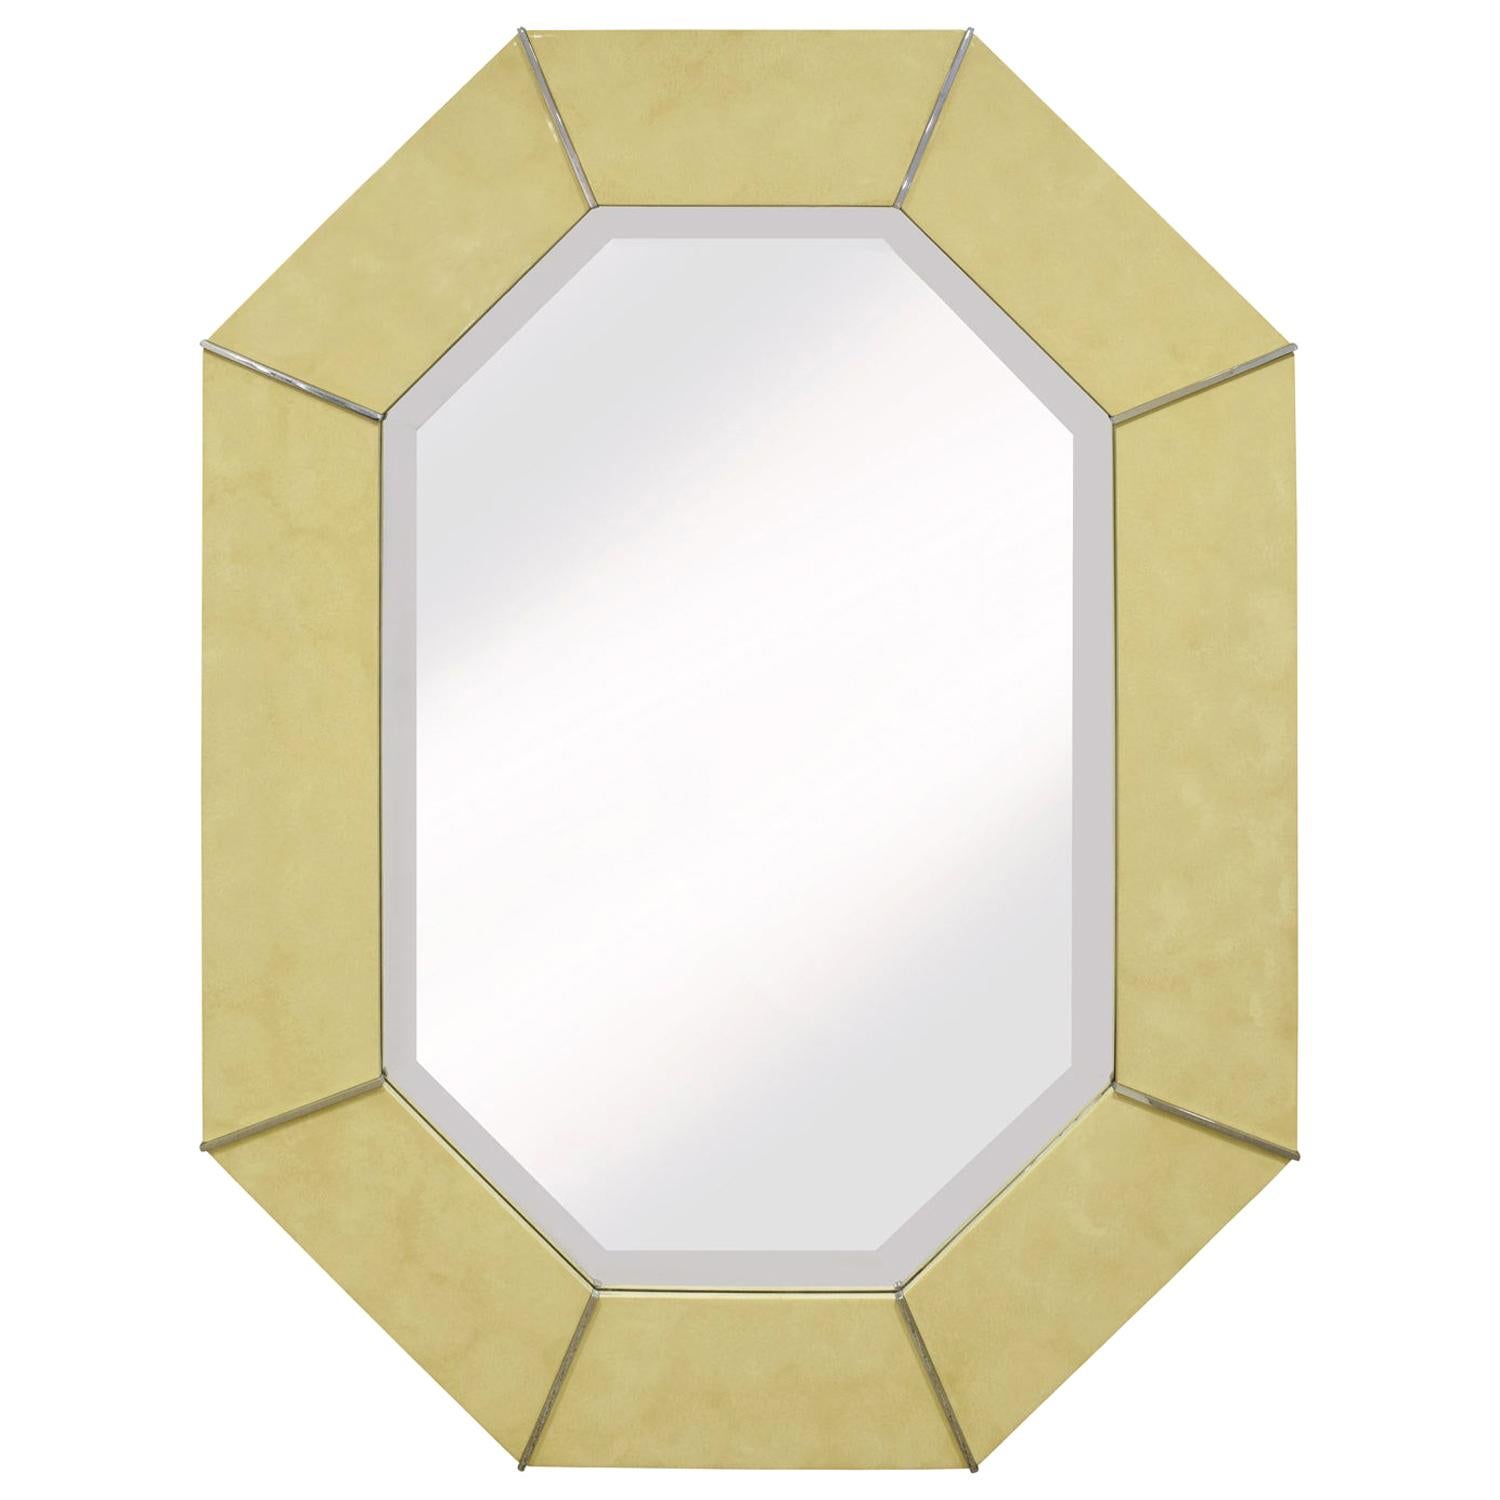 Karl Springer Octagonal Mirror in Ivory Lacquer with Chrome Accents, 1970s For Sale